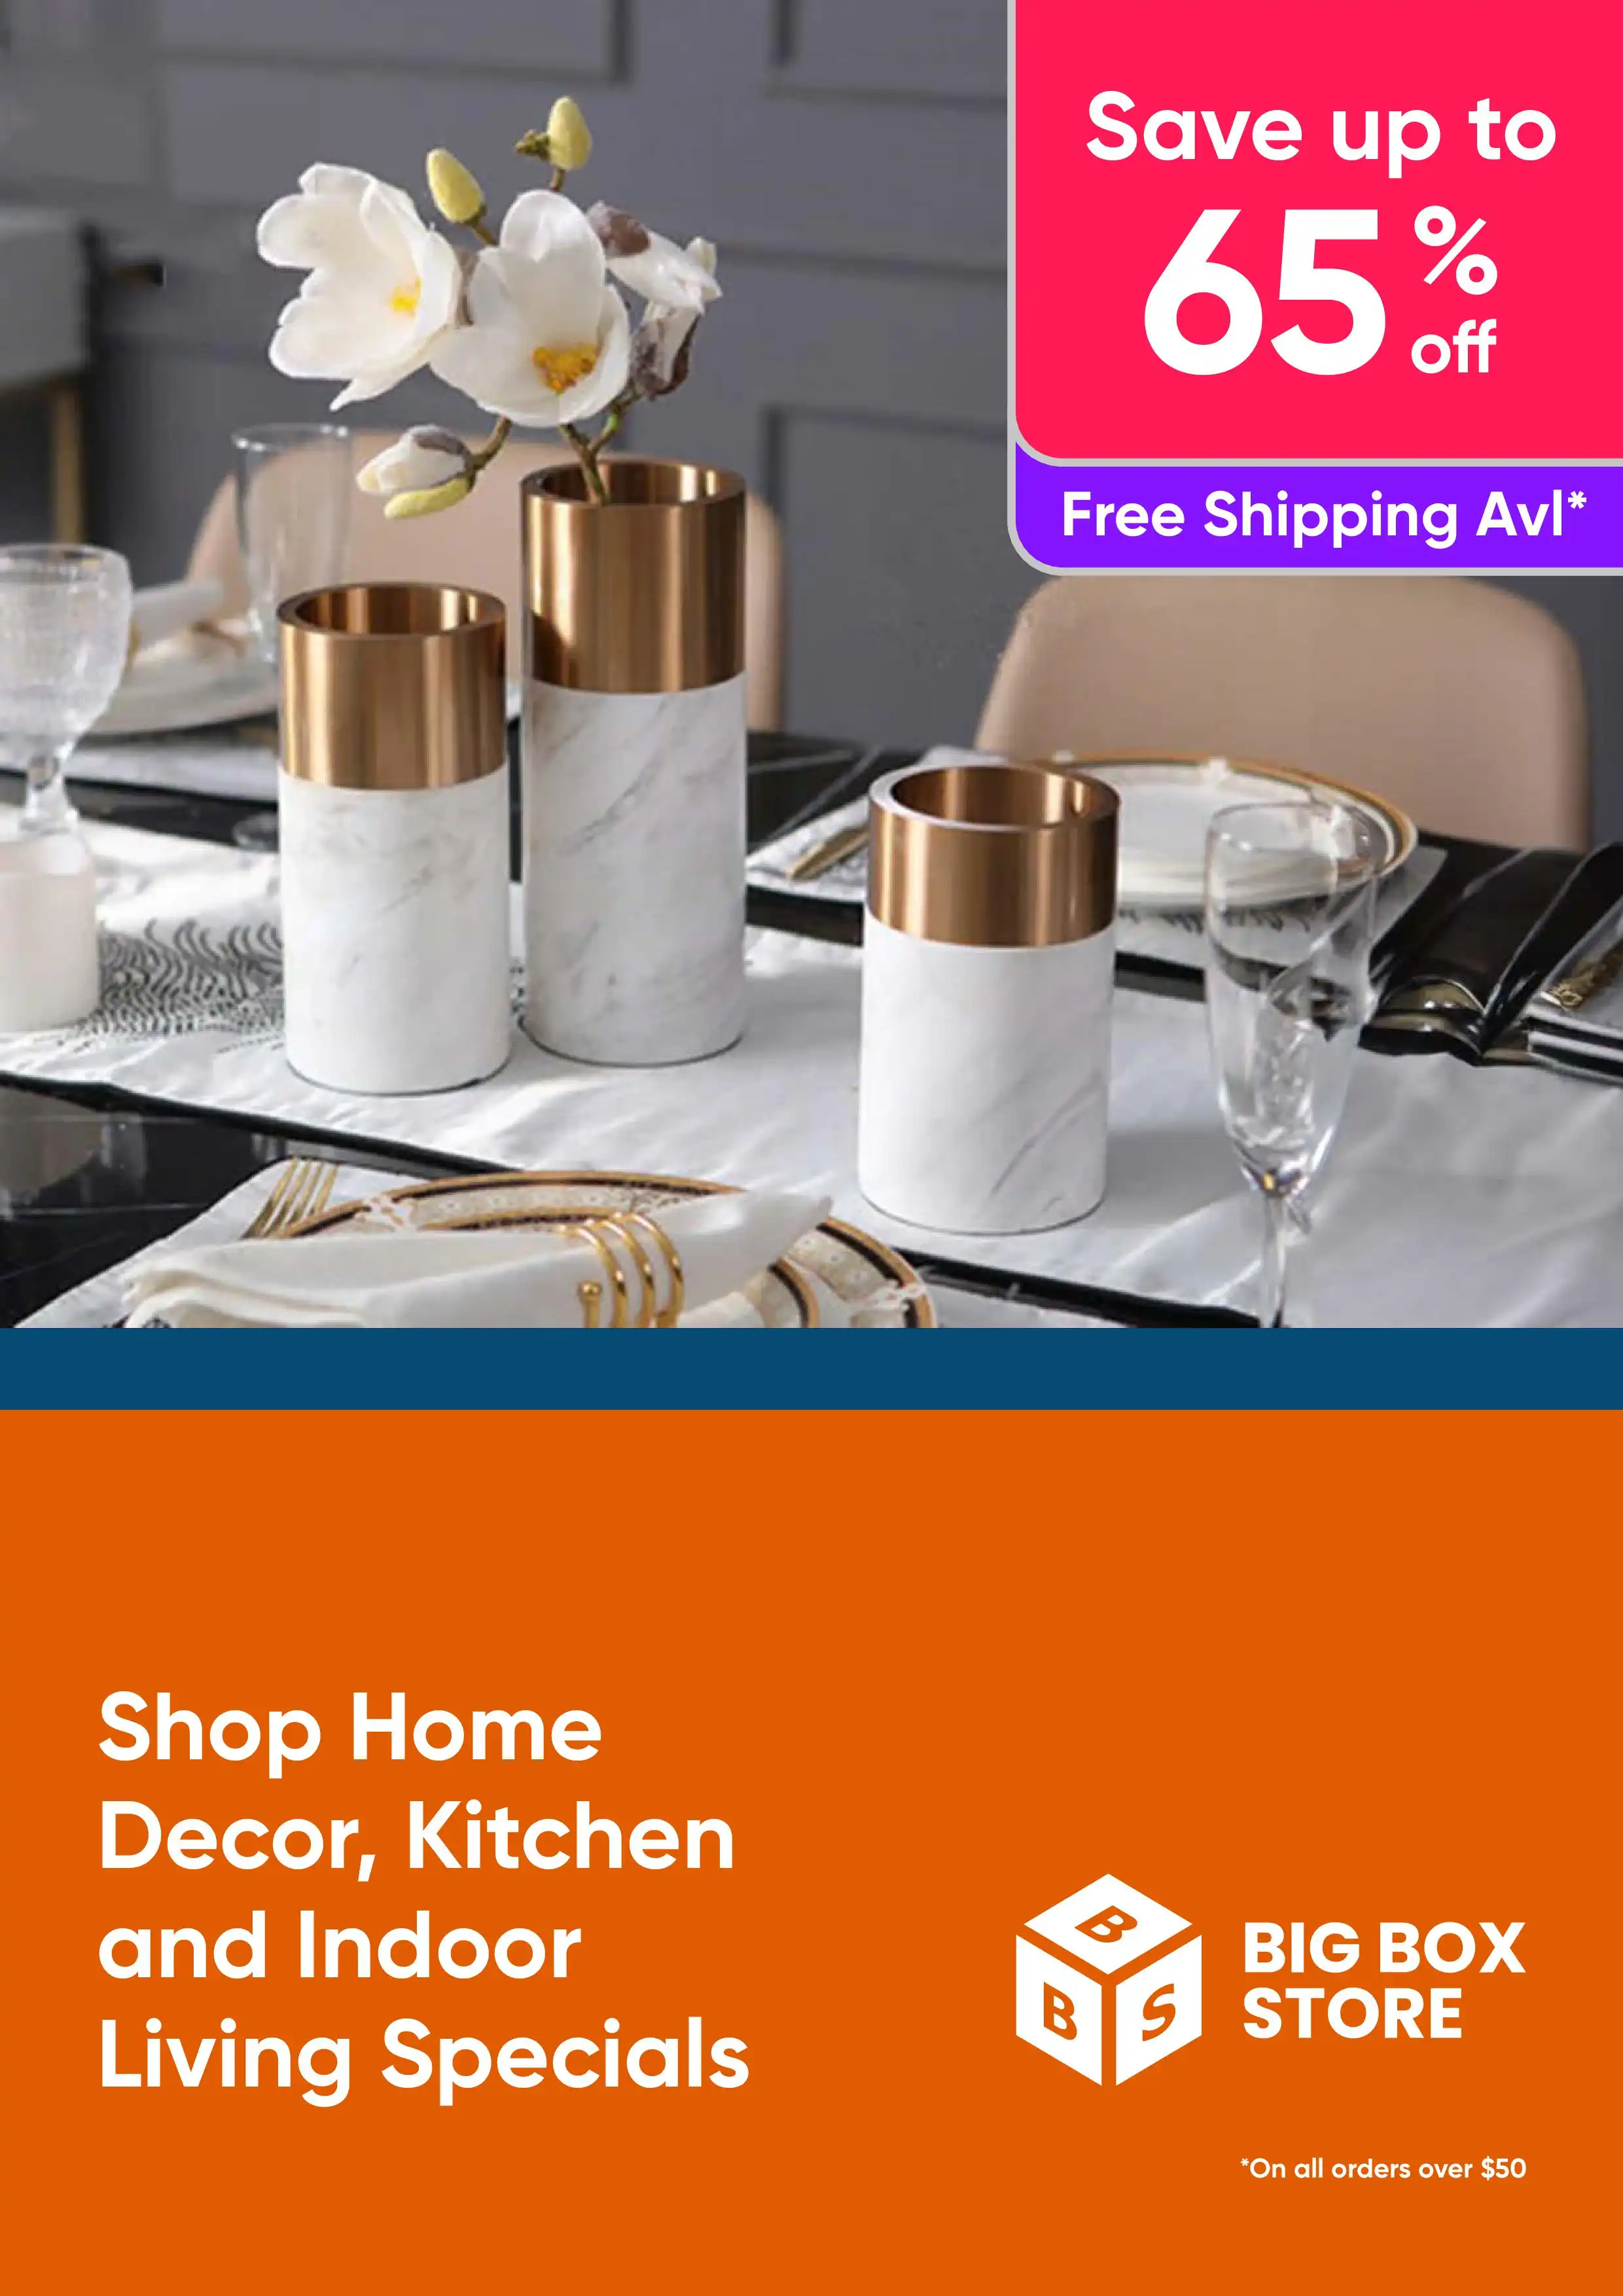 Shop Home Decor, Kitchen and Indoor Living Specials - Save Up to 65% Off